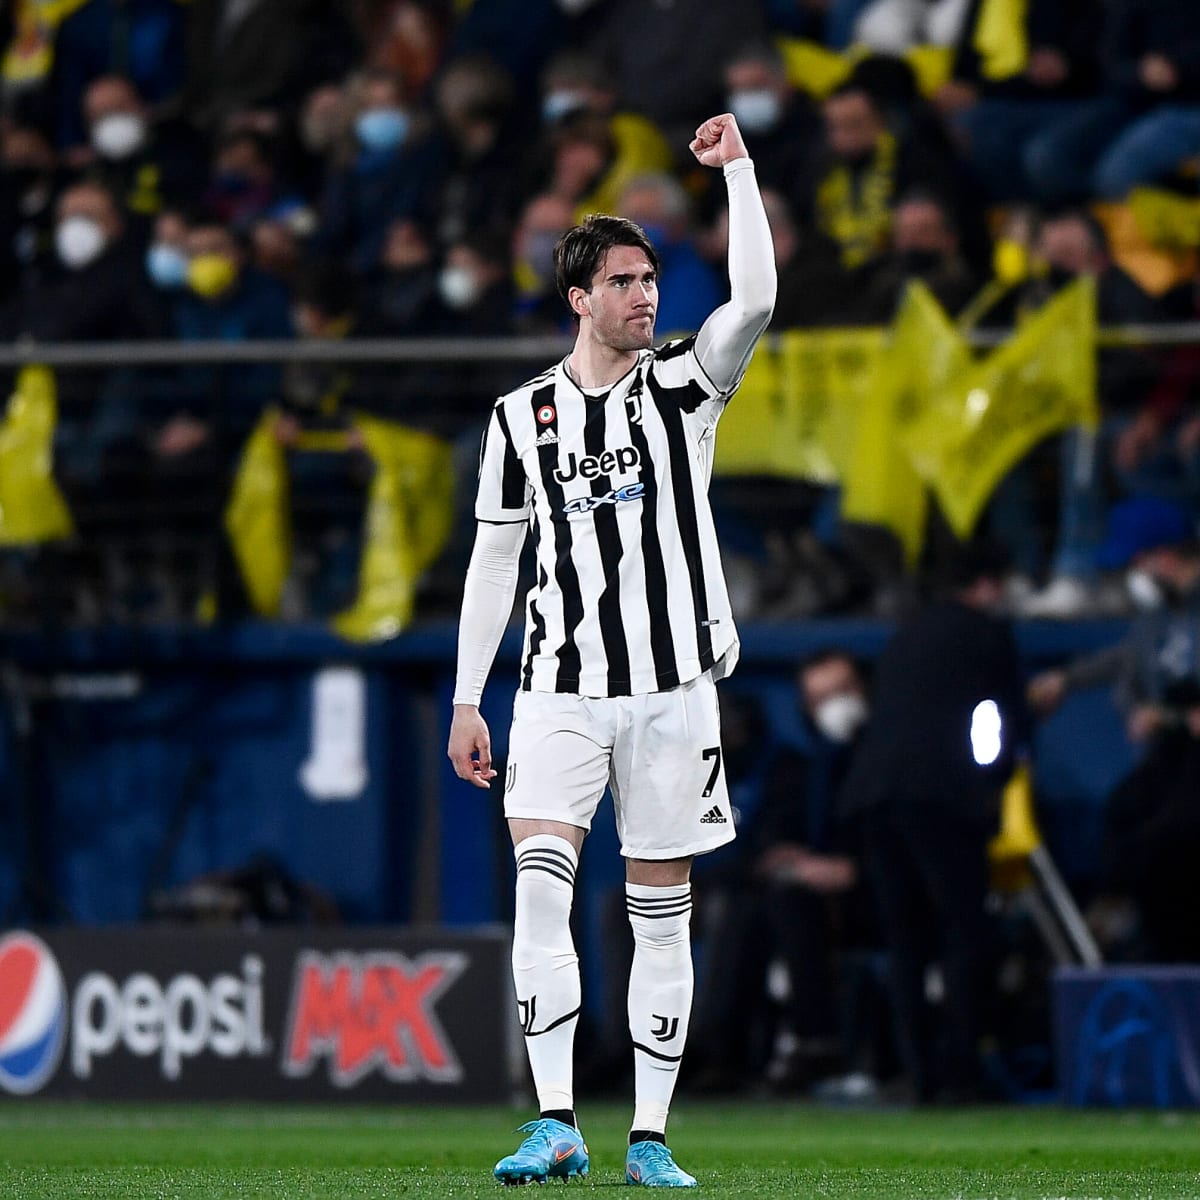 STATS SHOCKER: Vlahovic numbers for Monza defeat reflect Juventus crisis